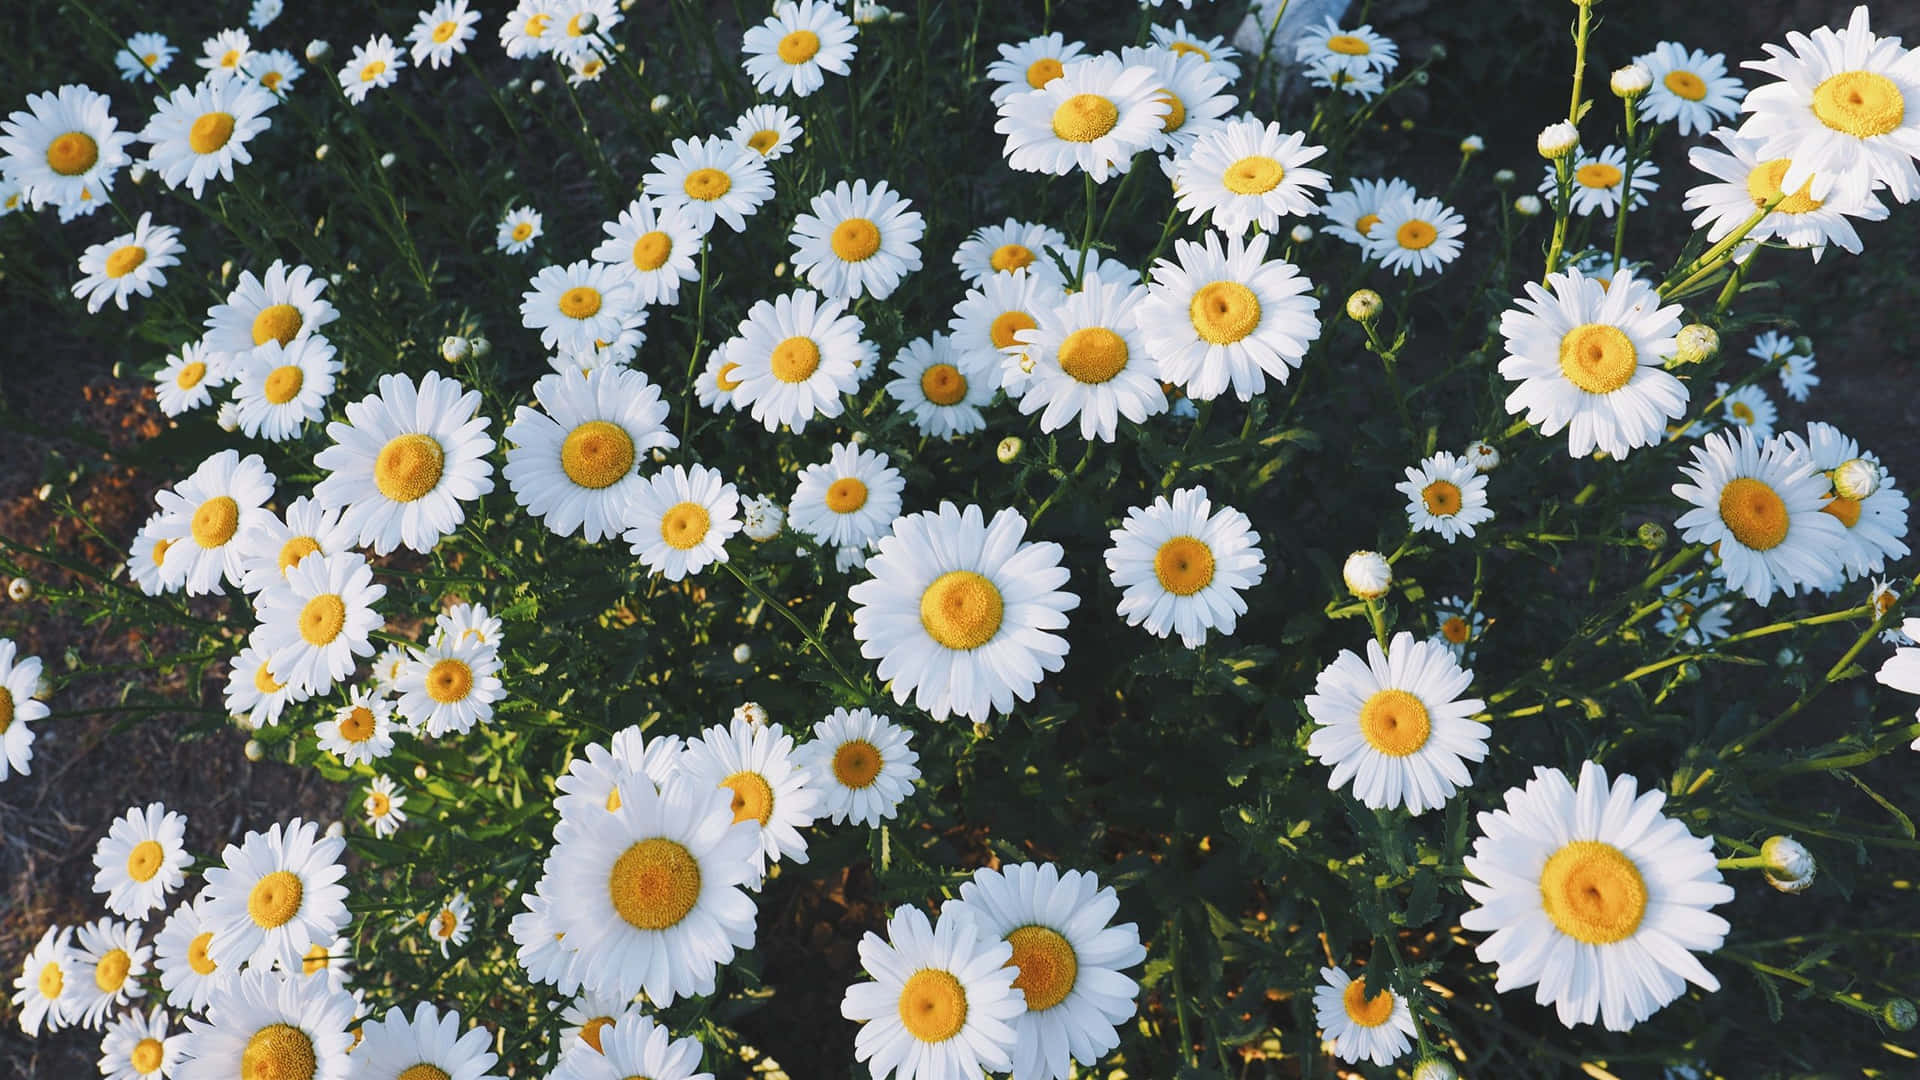 A Daisy Flower with Petals Drifting in the Wind Wallpaper